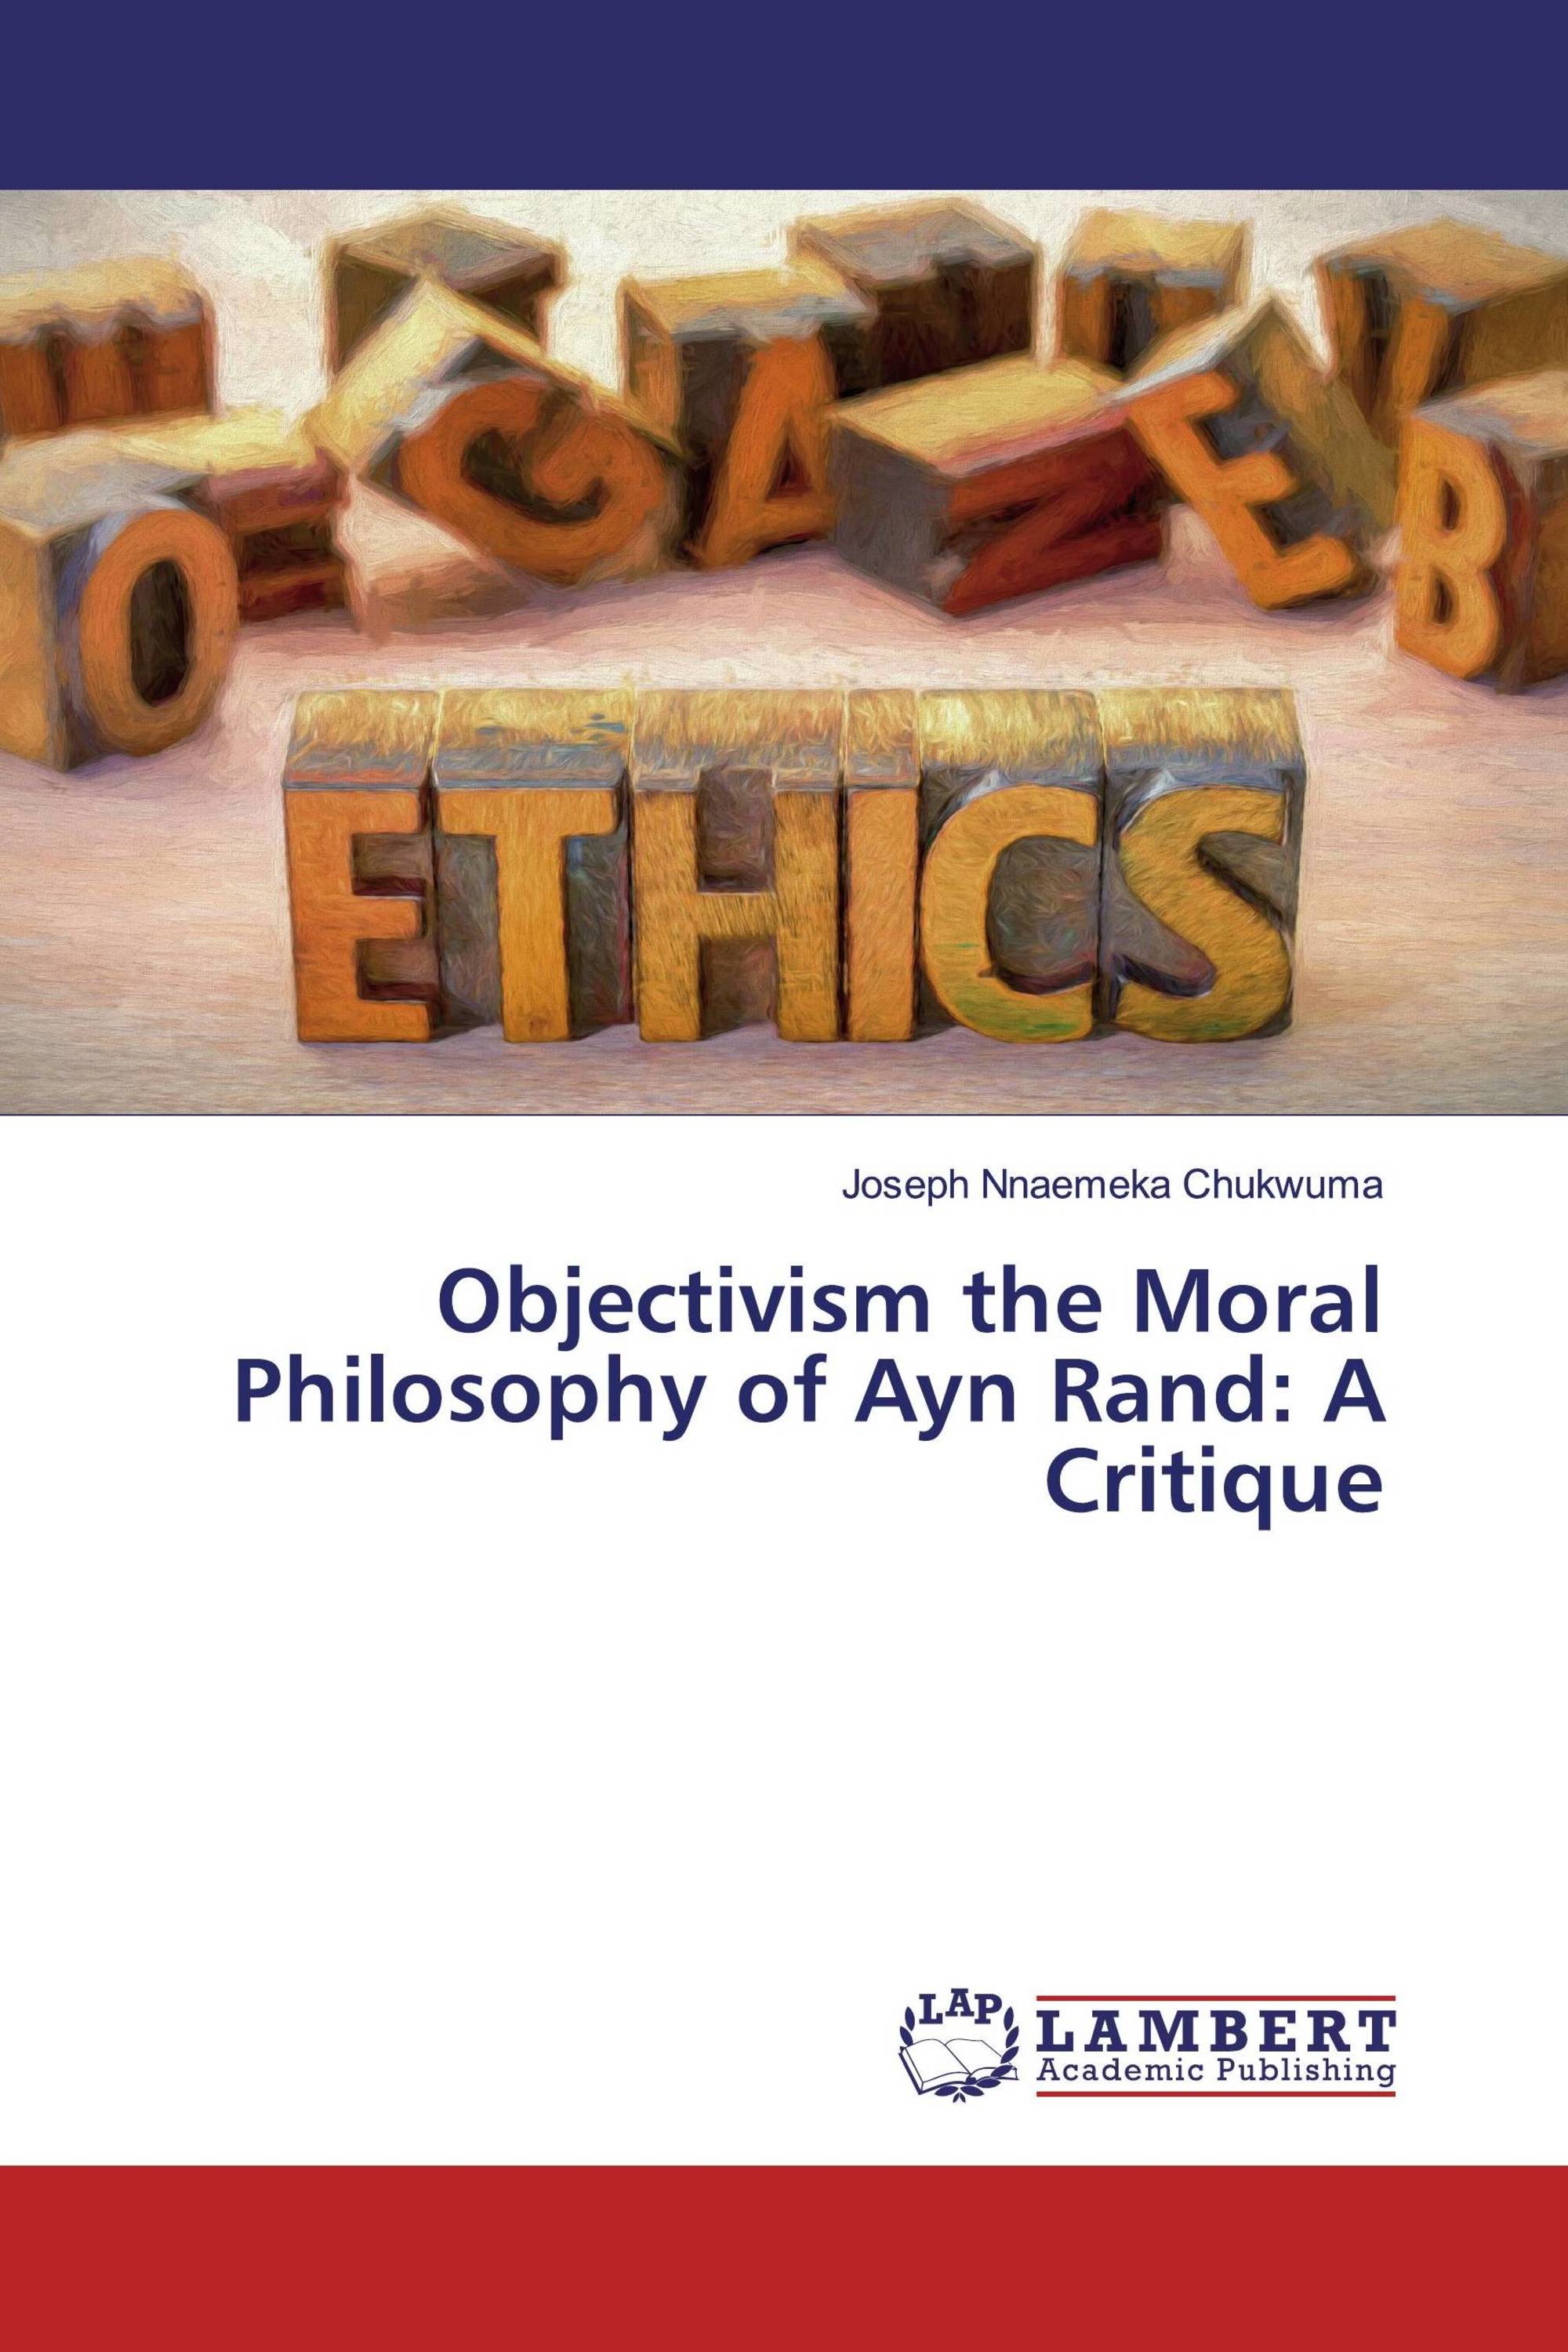 ethical objectivism